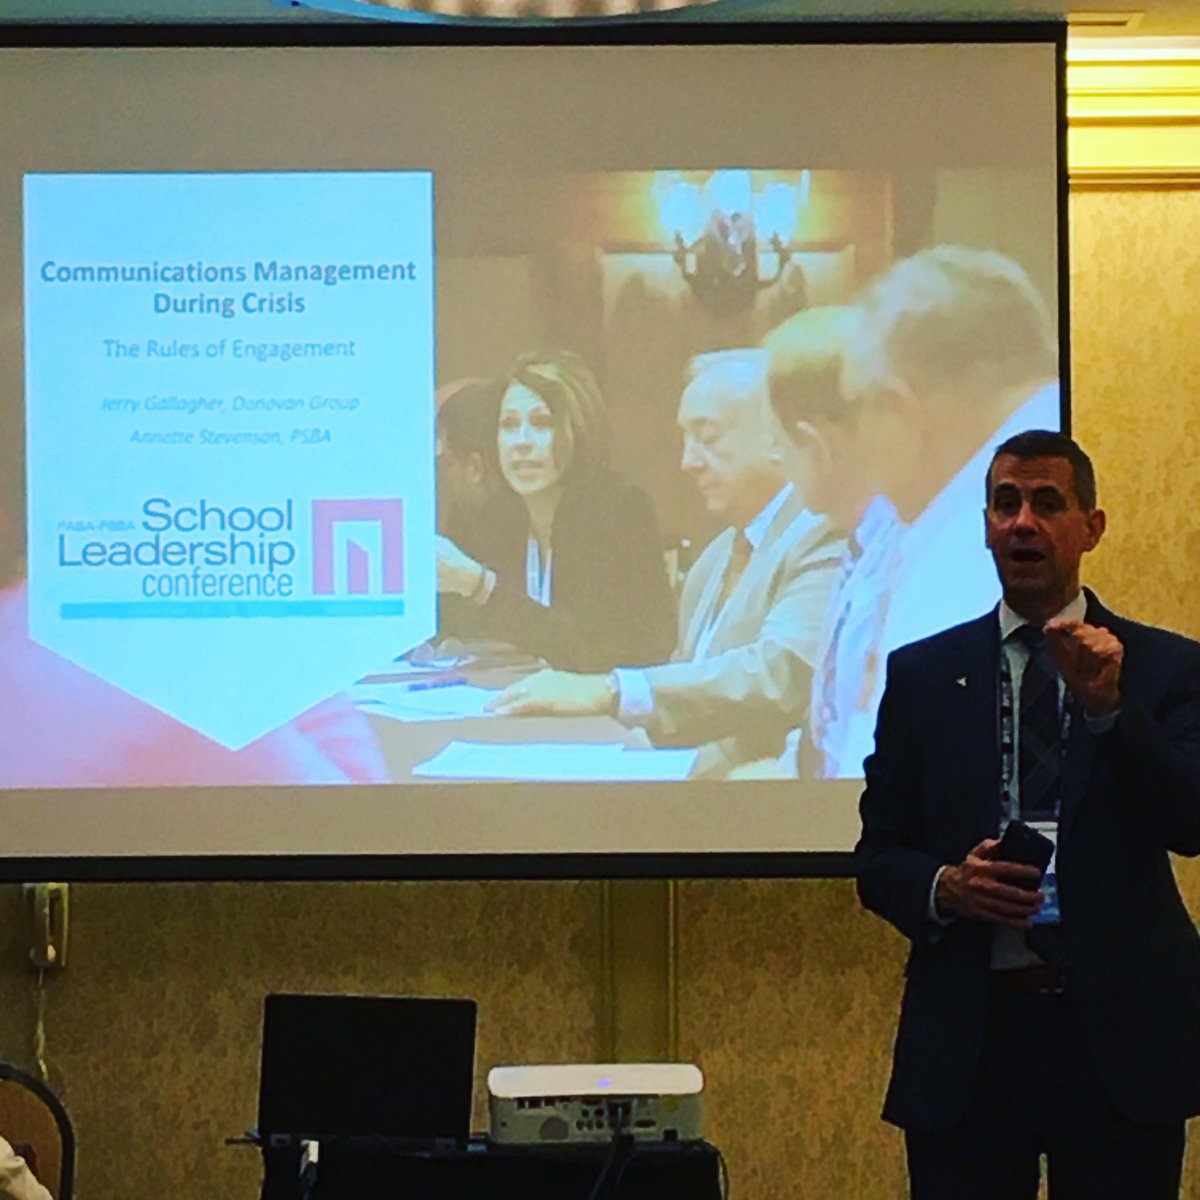 Looking forward to the content of the next session - Communications Management During Crisis. •
•
Crisis communication tools have value in a variety of audiences. •
•
#PASLC2019 @PSBA #communications #conferences #networking #viewfrommydesk #workingatisett